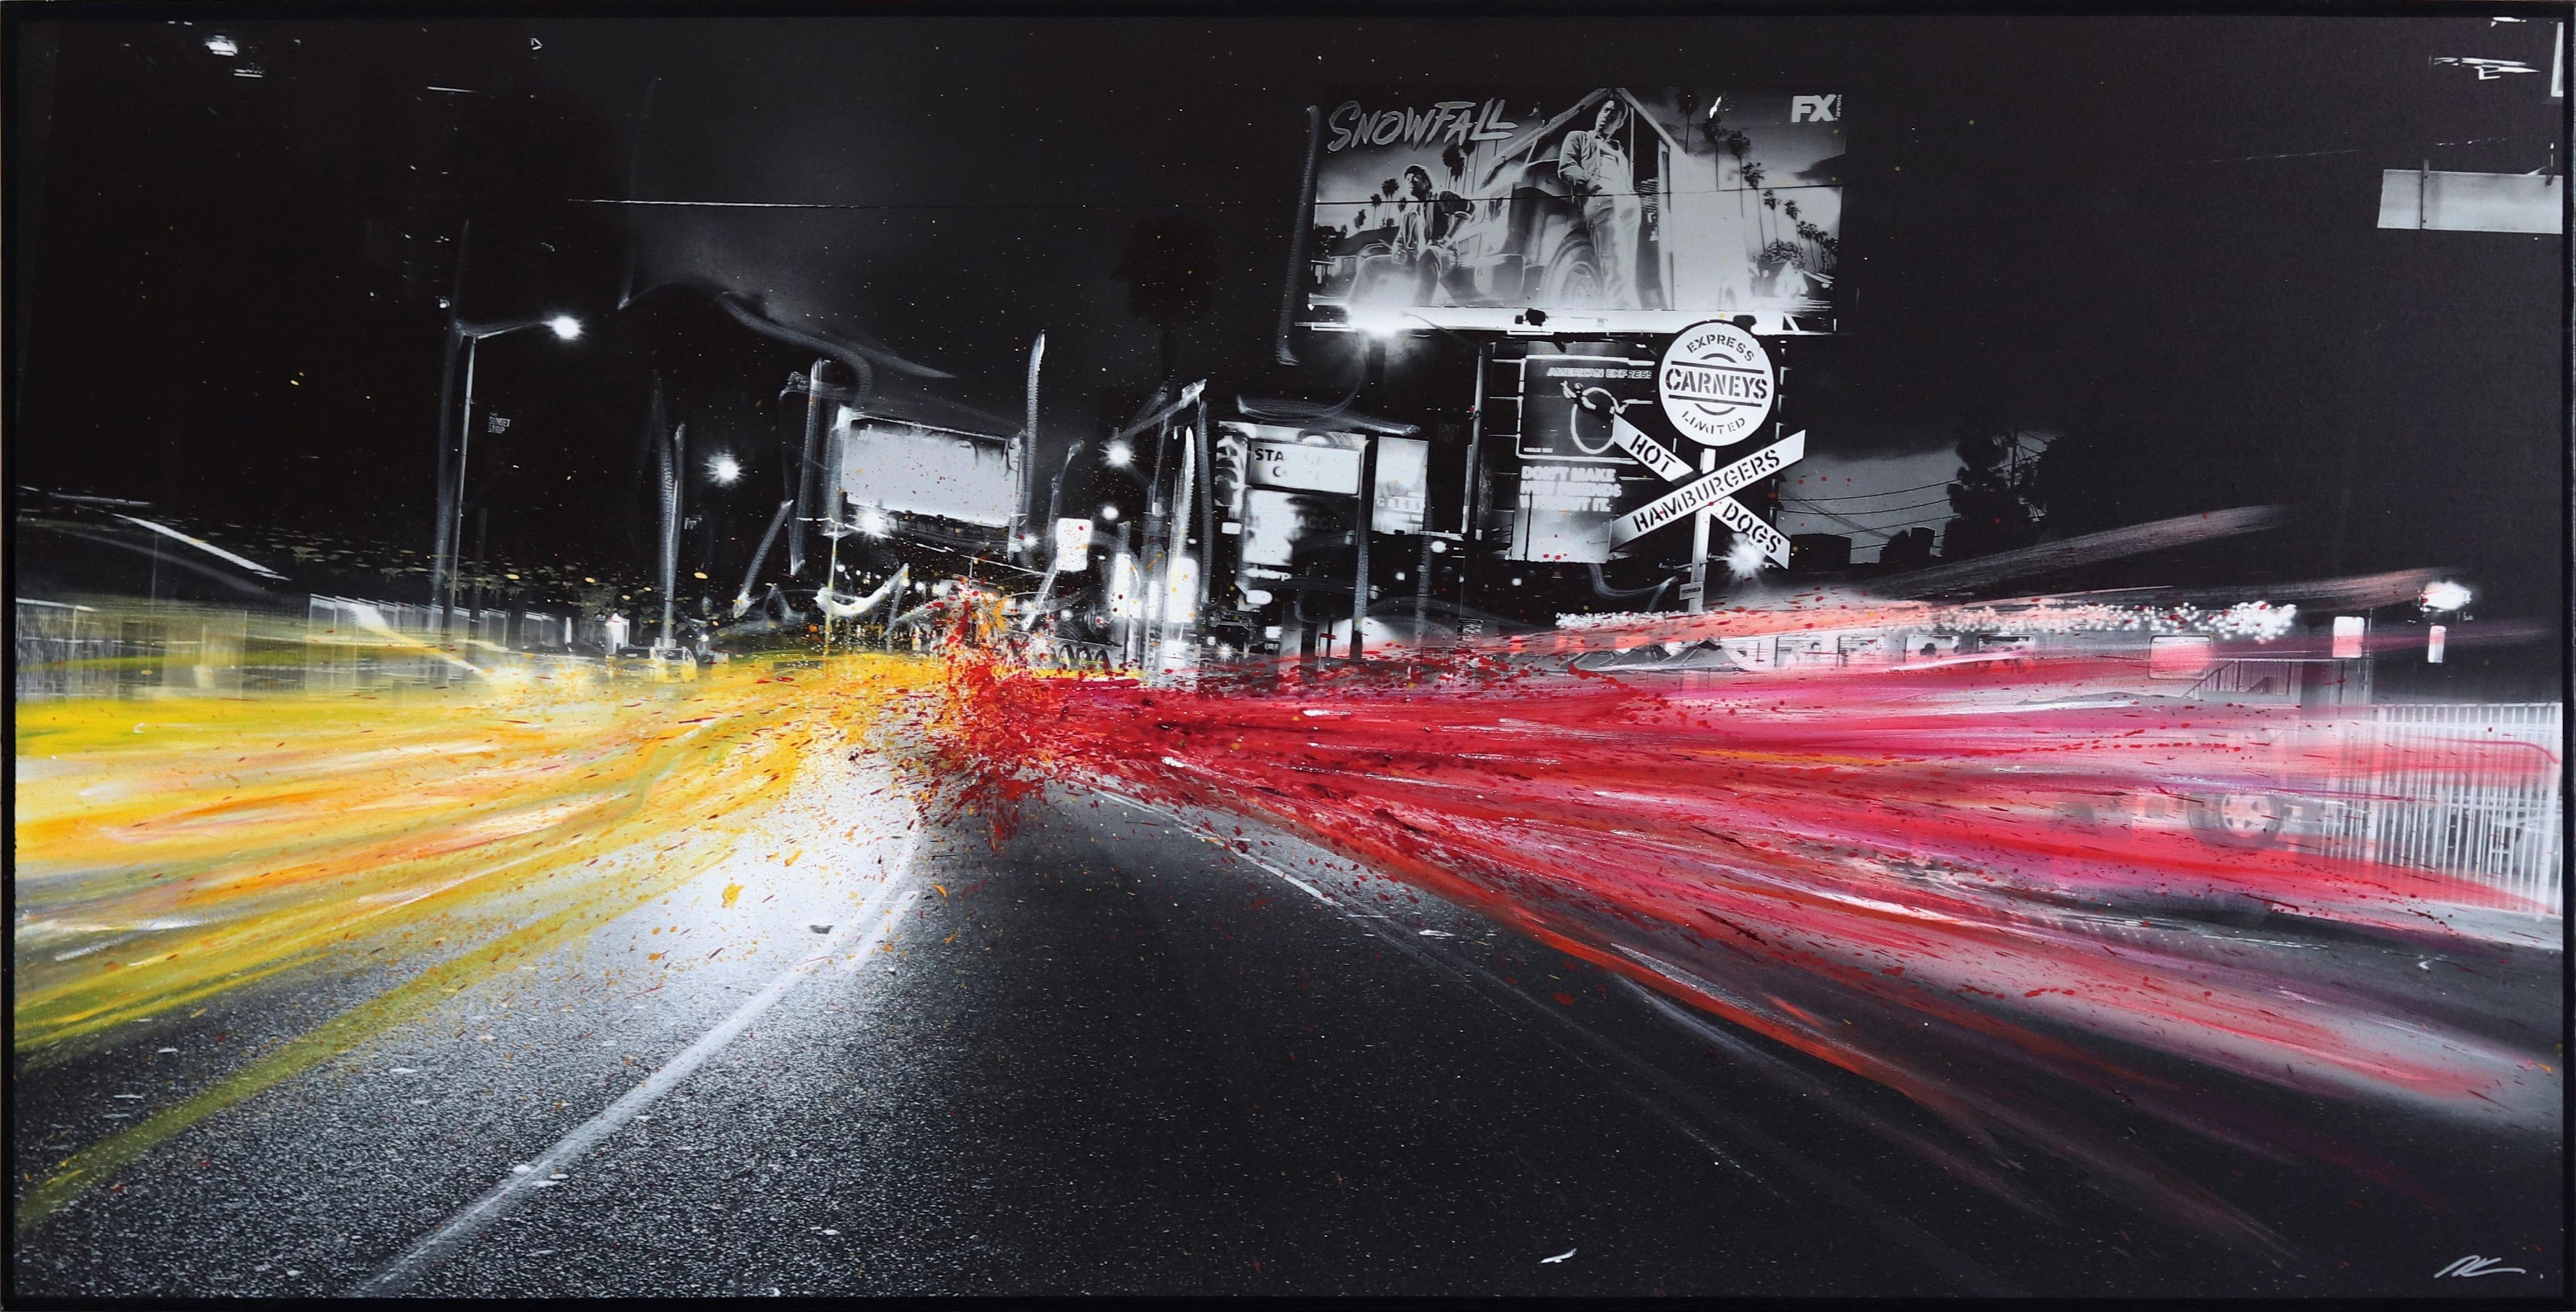 Pete Kasprzak Landscape Painting - Carney's (Red and Yellow) - Large Original Street Art Photography Painting